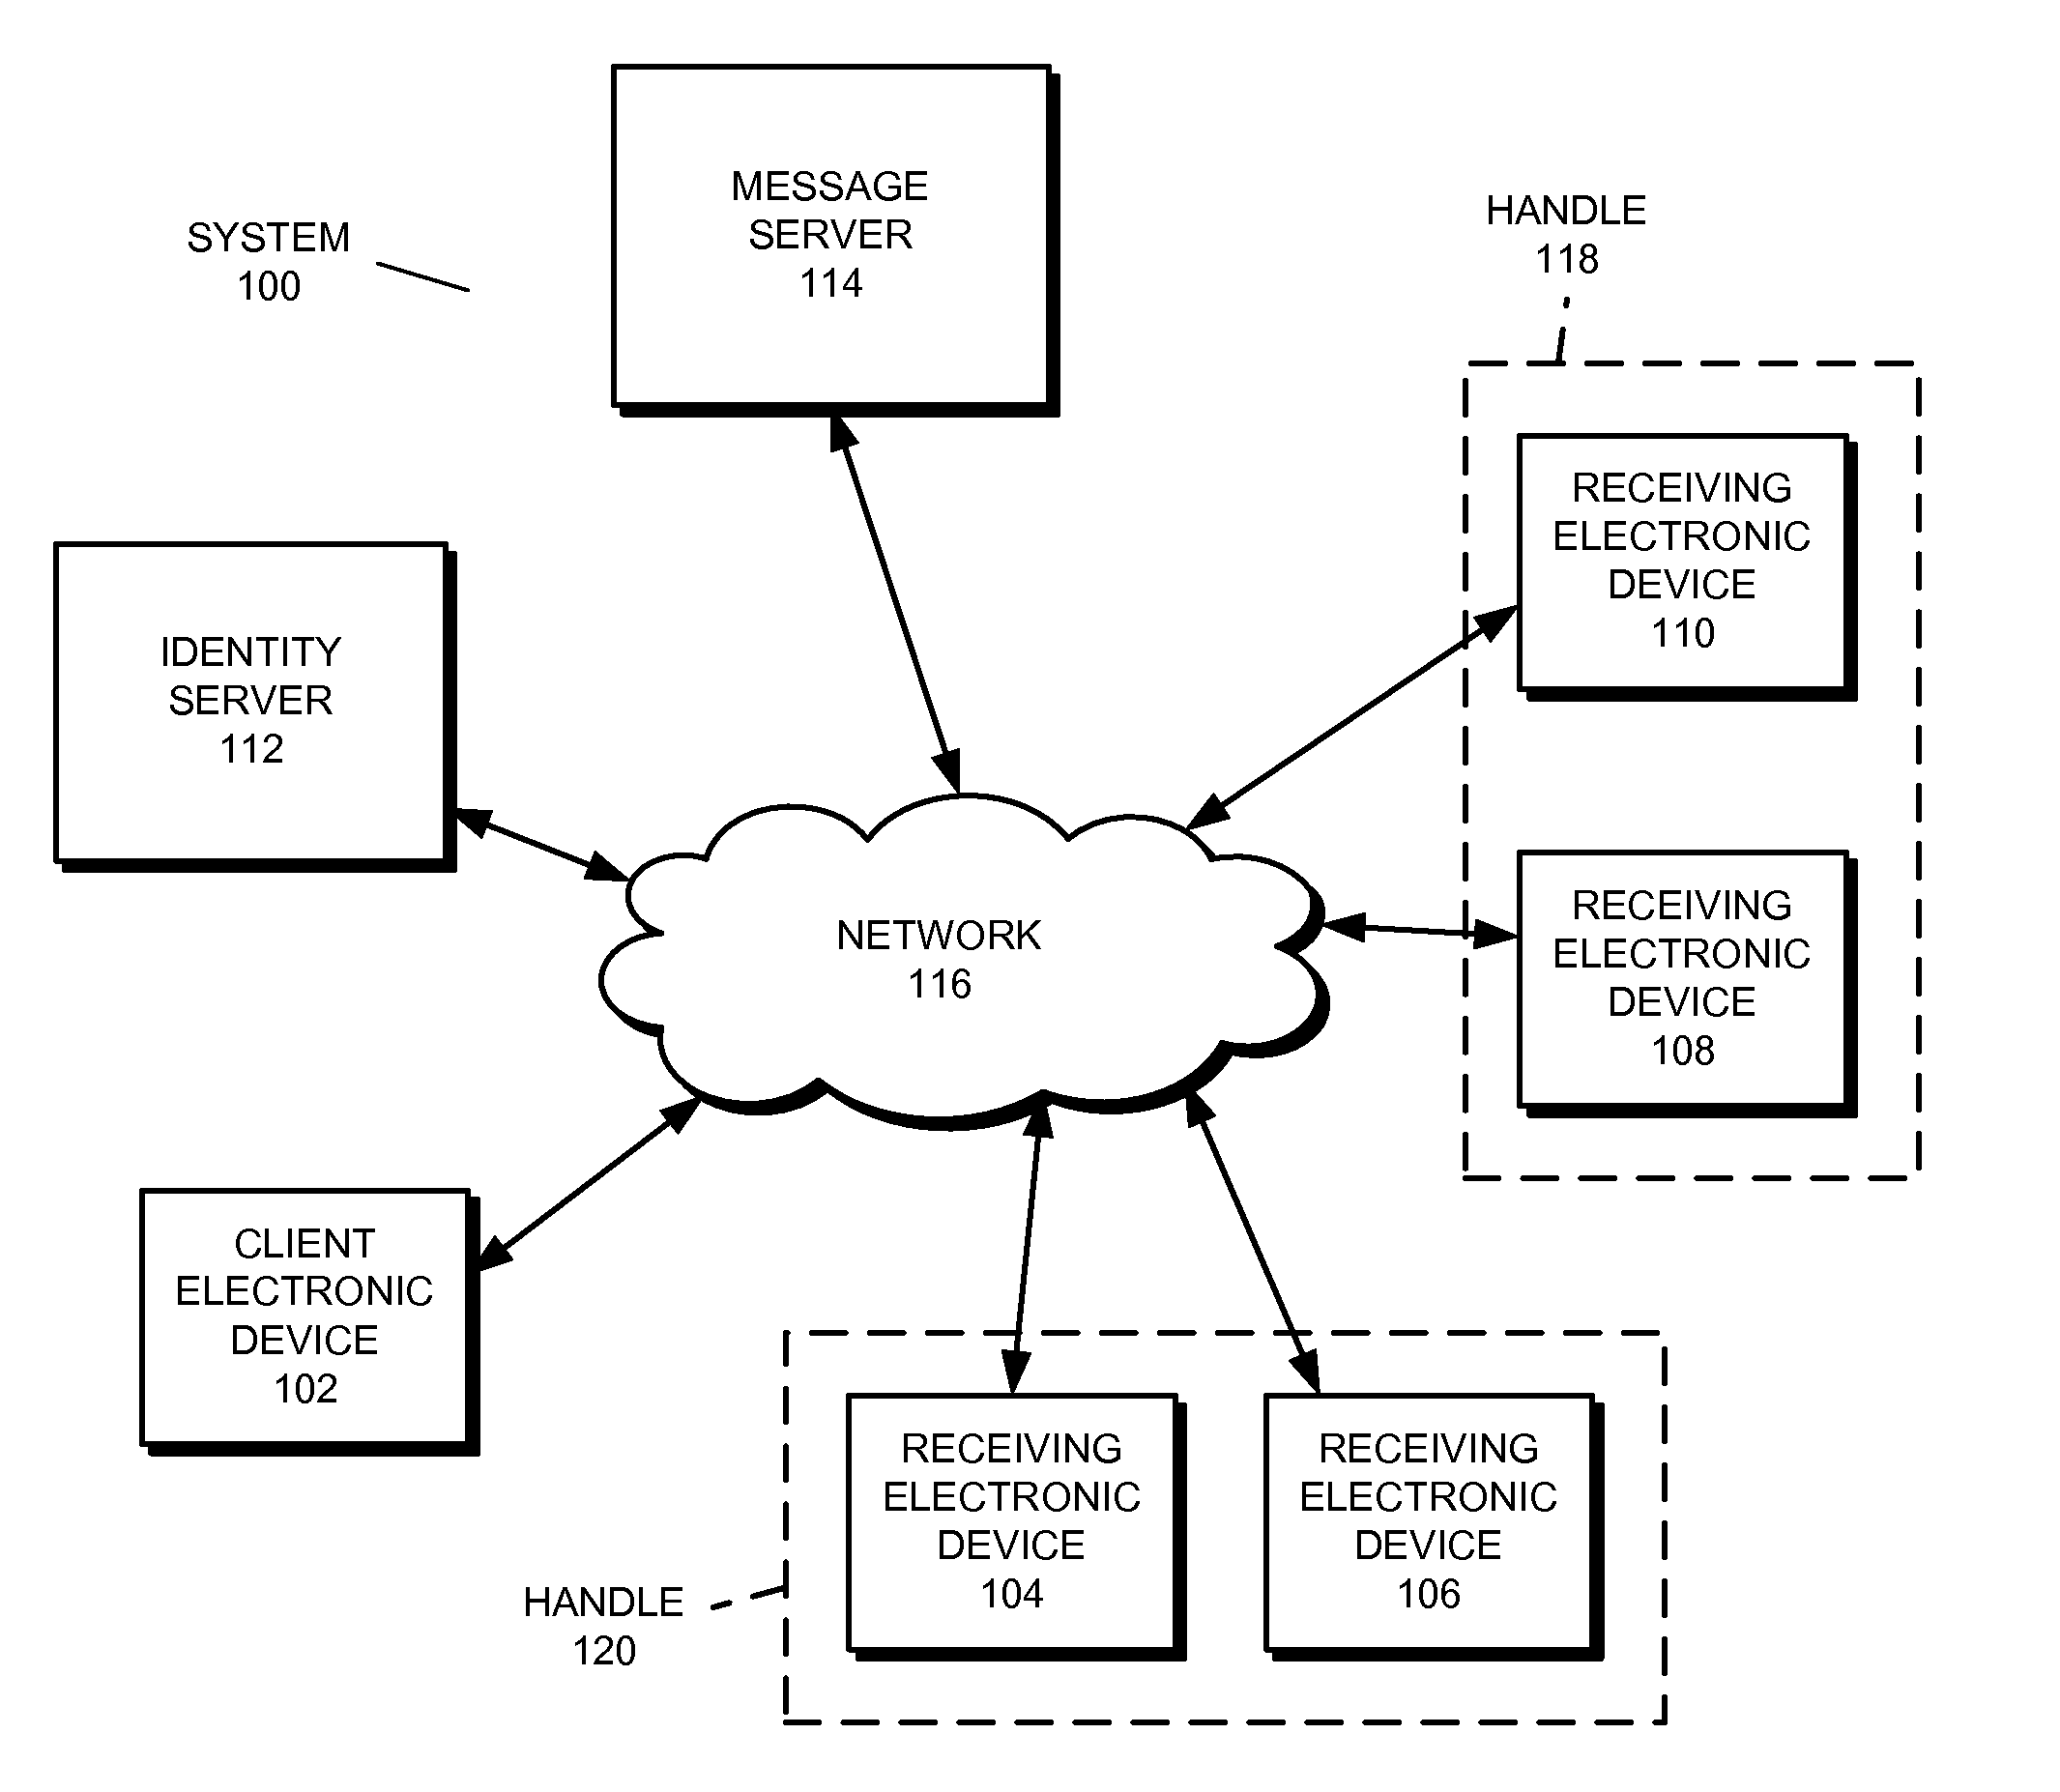 Sending messages to multiple receiving electronic devices using a message server